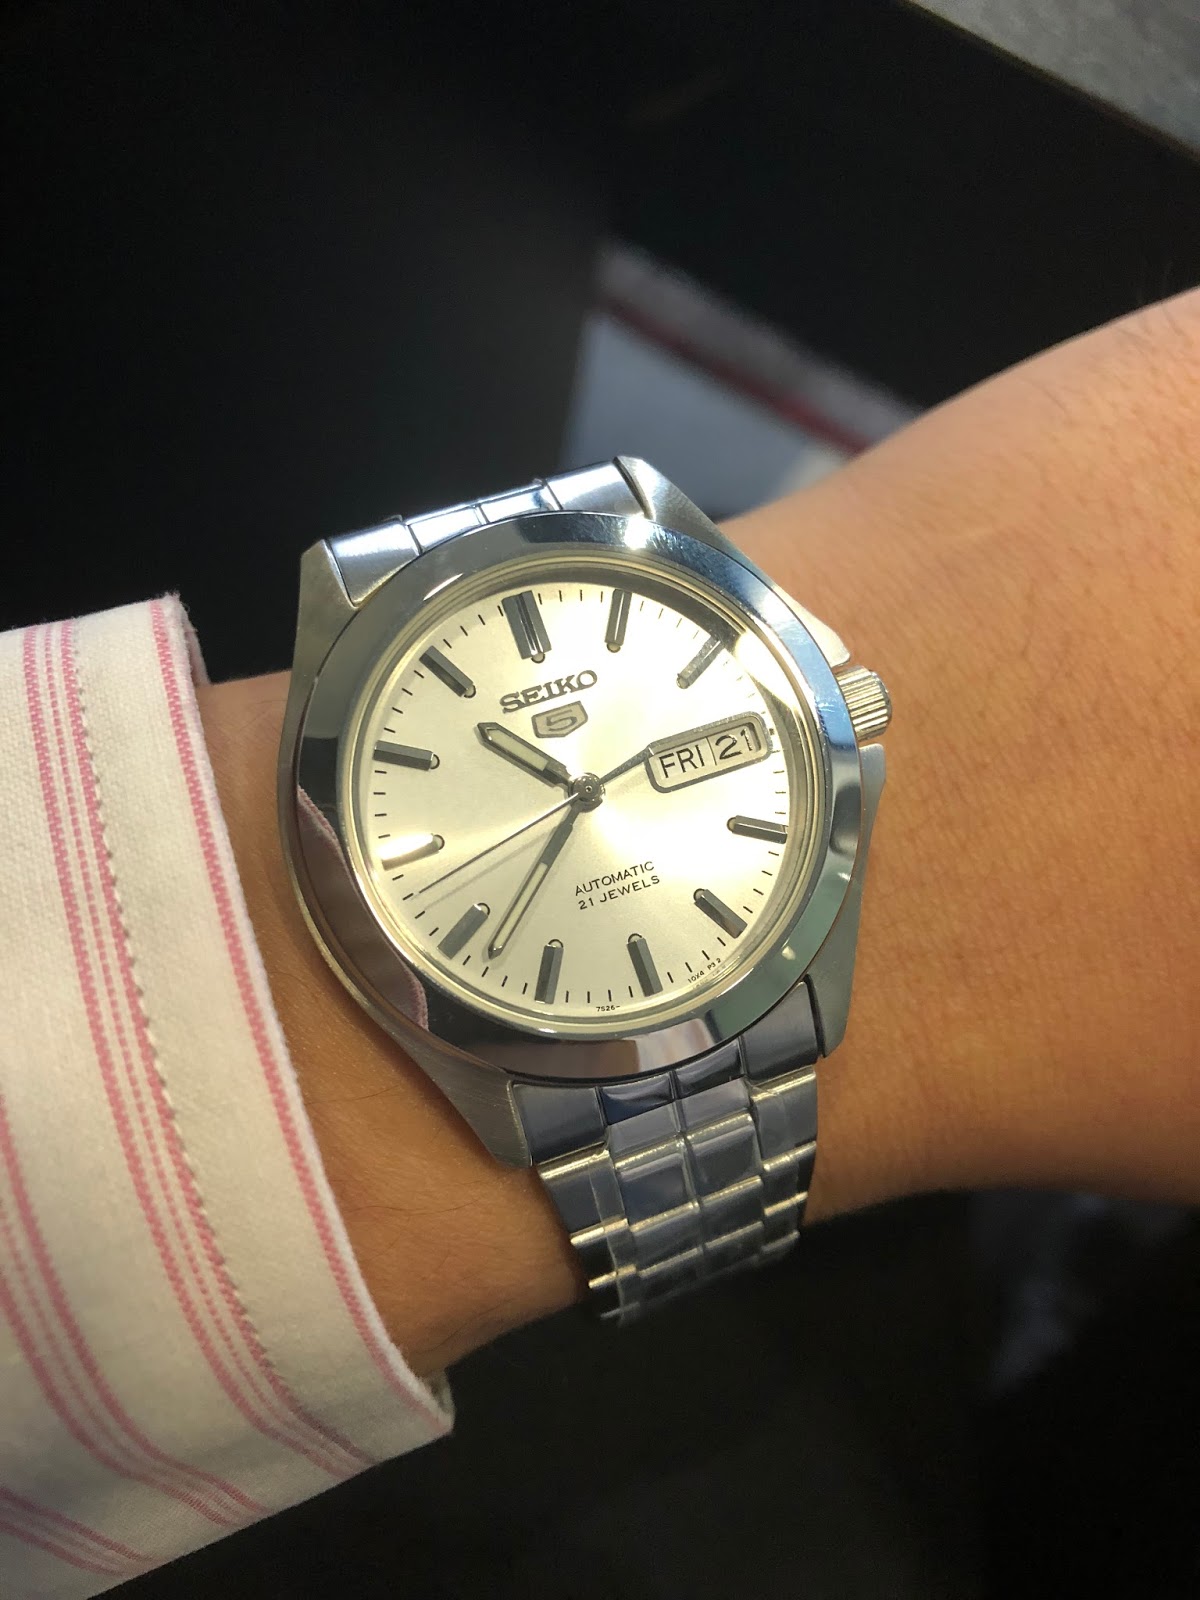 My Eastern Watch Collection: Seiko 5 Automatic Men Watch SNKK87 - The  Cheapest of the Seiko White Knights, A Review (plus Video)